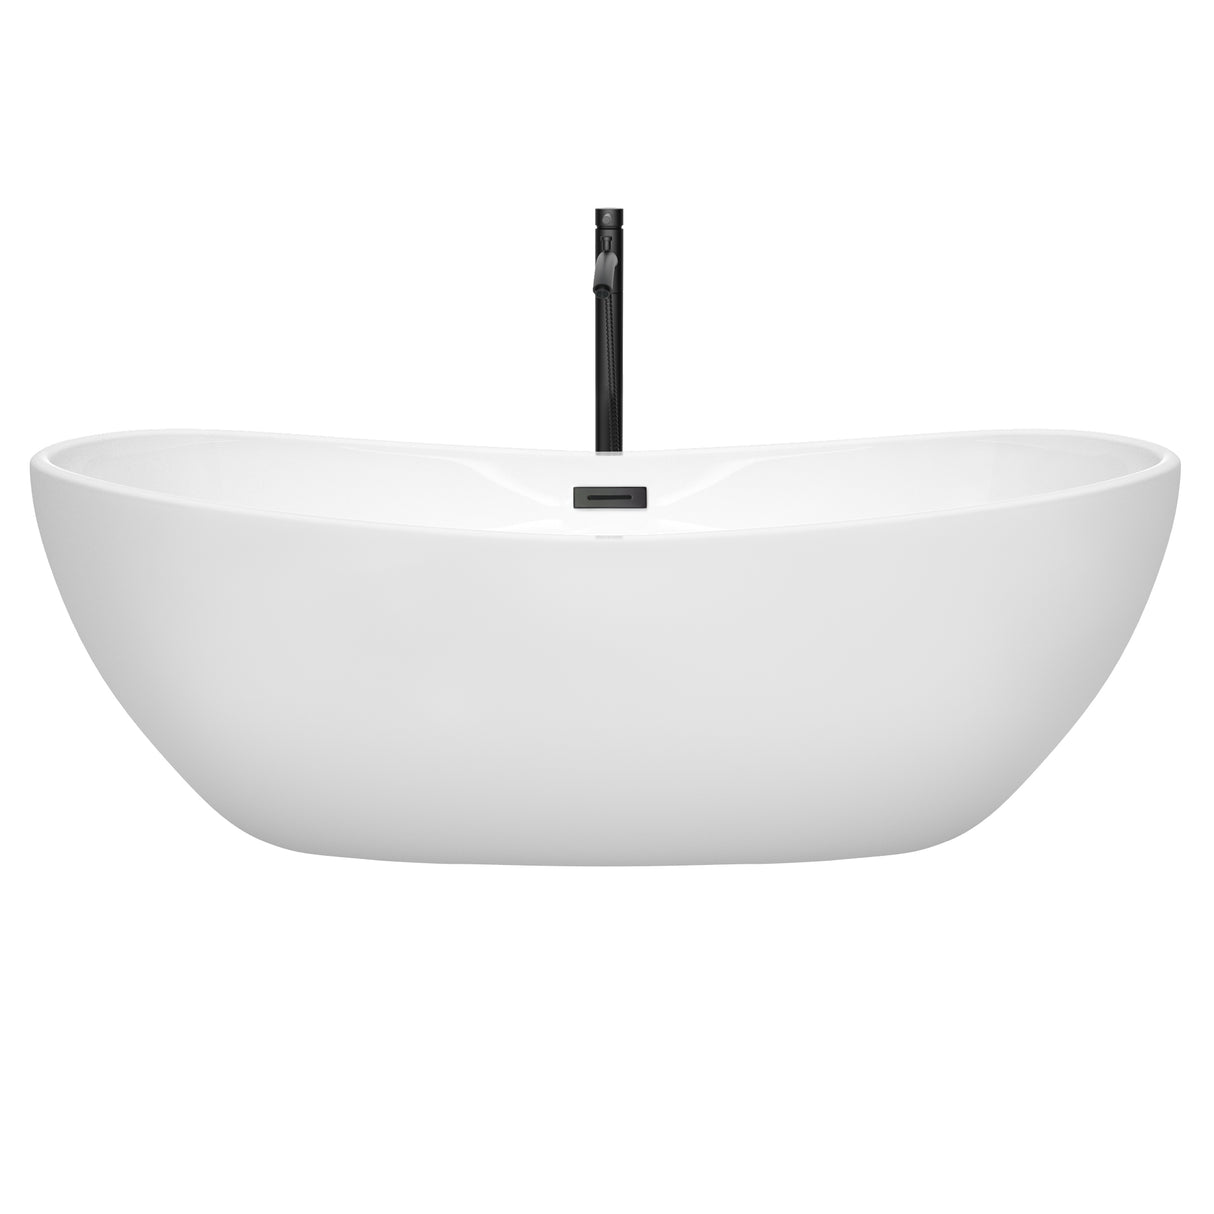 Rebecca 70 Inch Freestanding Bathtub in White with Floor Mounted Faucet Drain and Overflow Trim in Matte Black